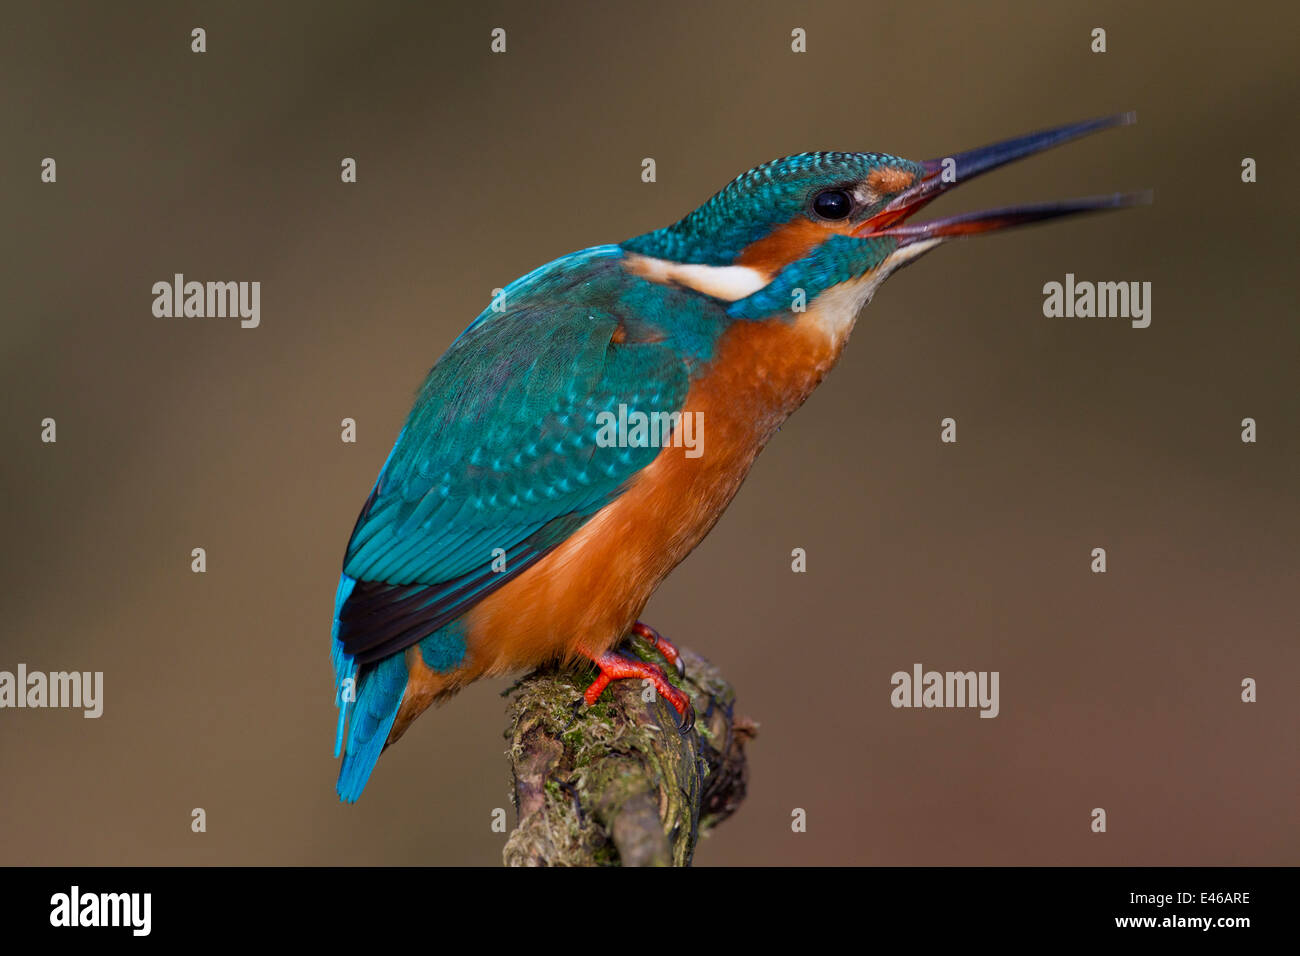 Common kingfisher / Eurasian kingfisher (Alcedo atthis) perched on branch and calling Stock Photo